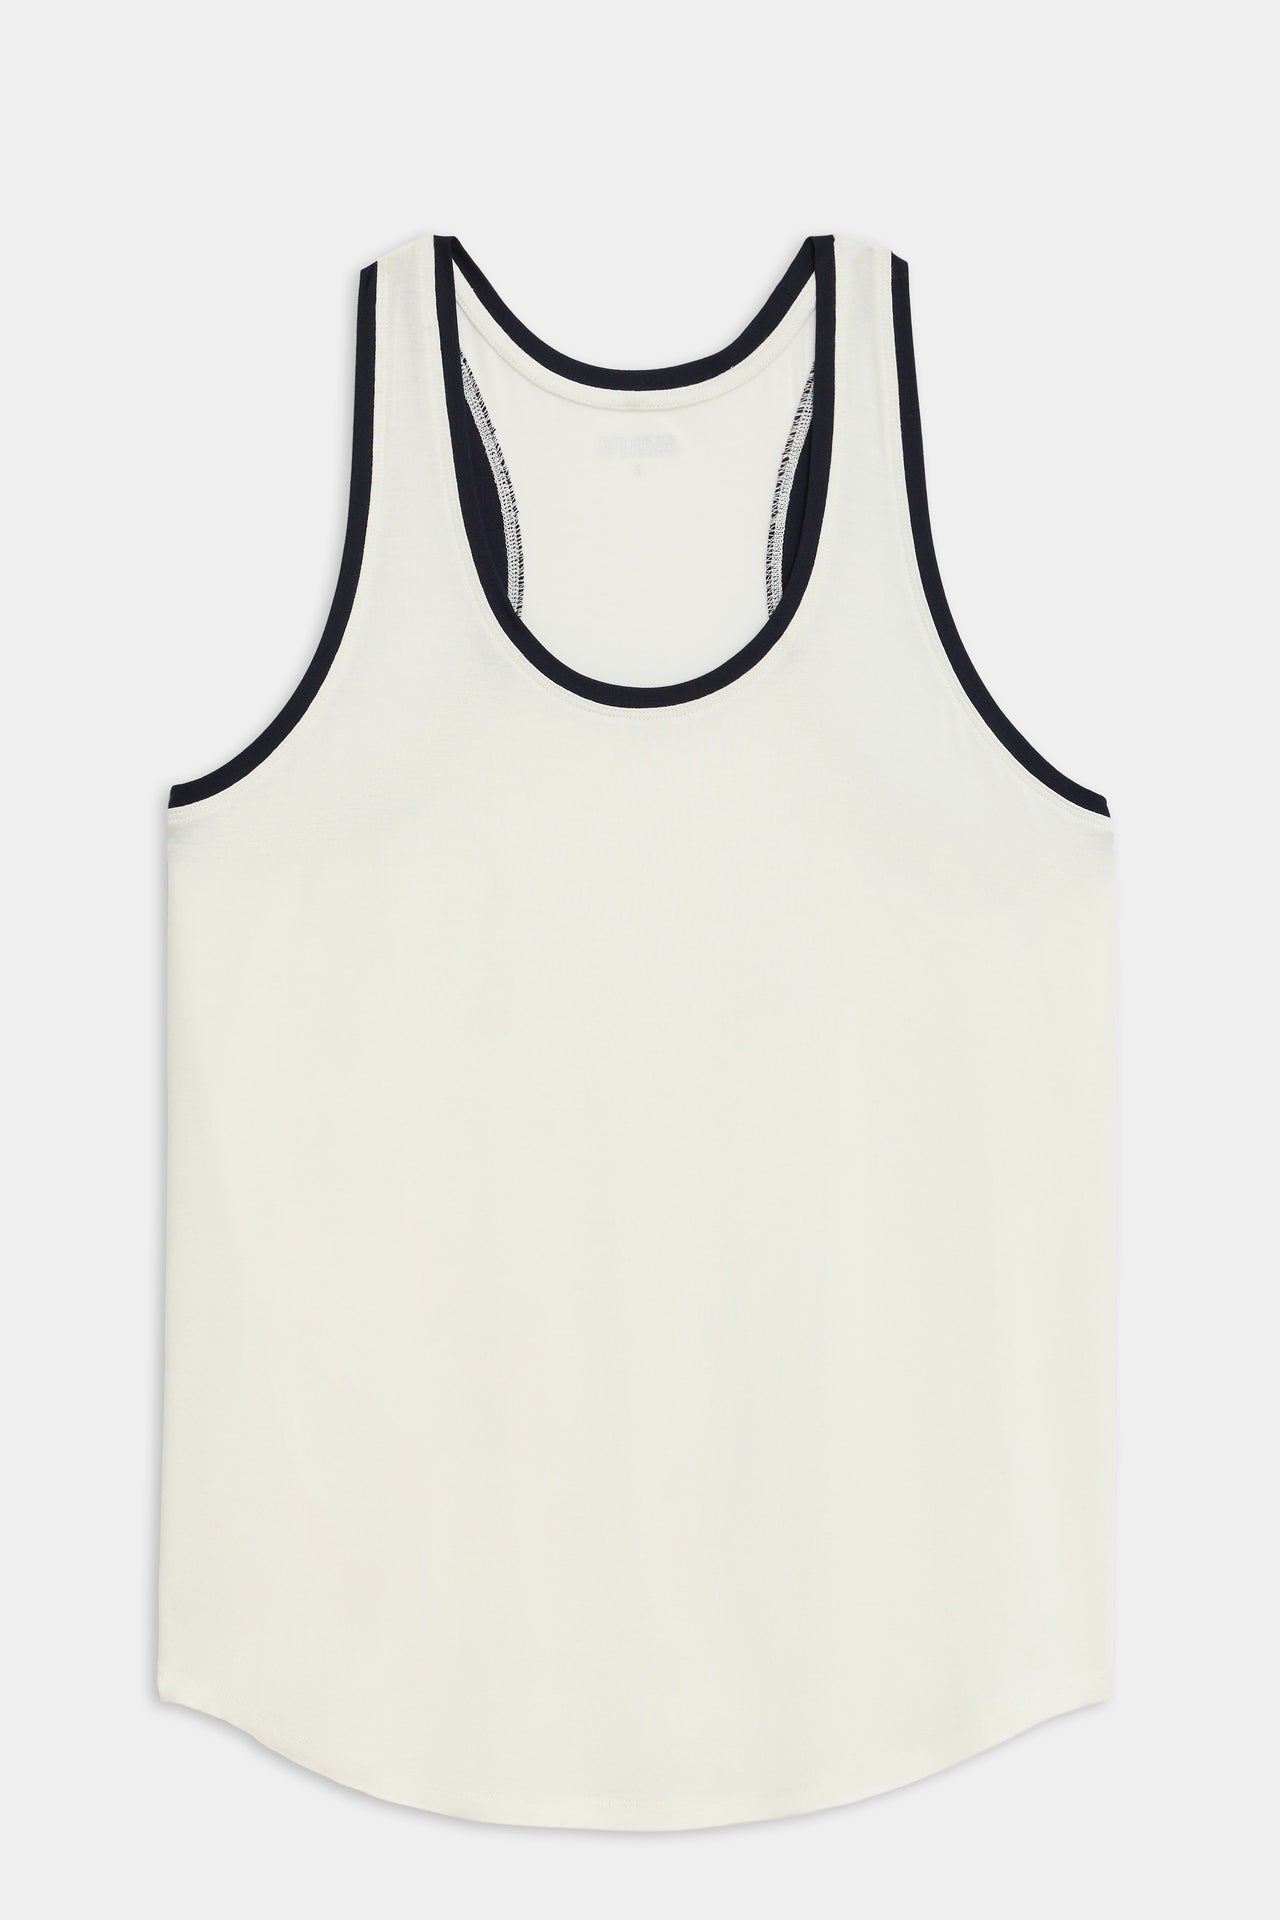 A Hana Ringer Tank in White/Indigo with black trim, perfect for gym workouts by SPLITS59.